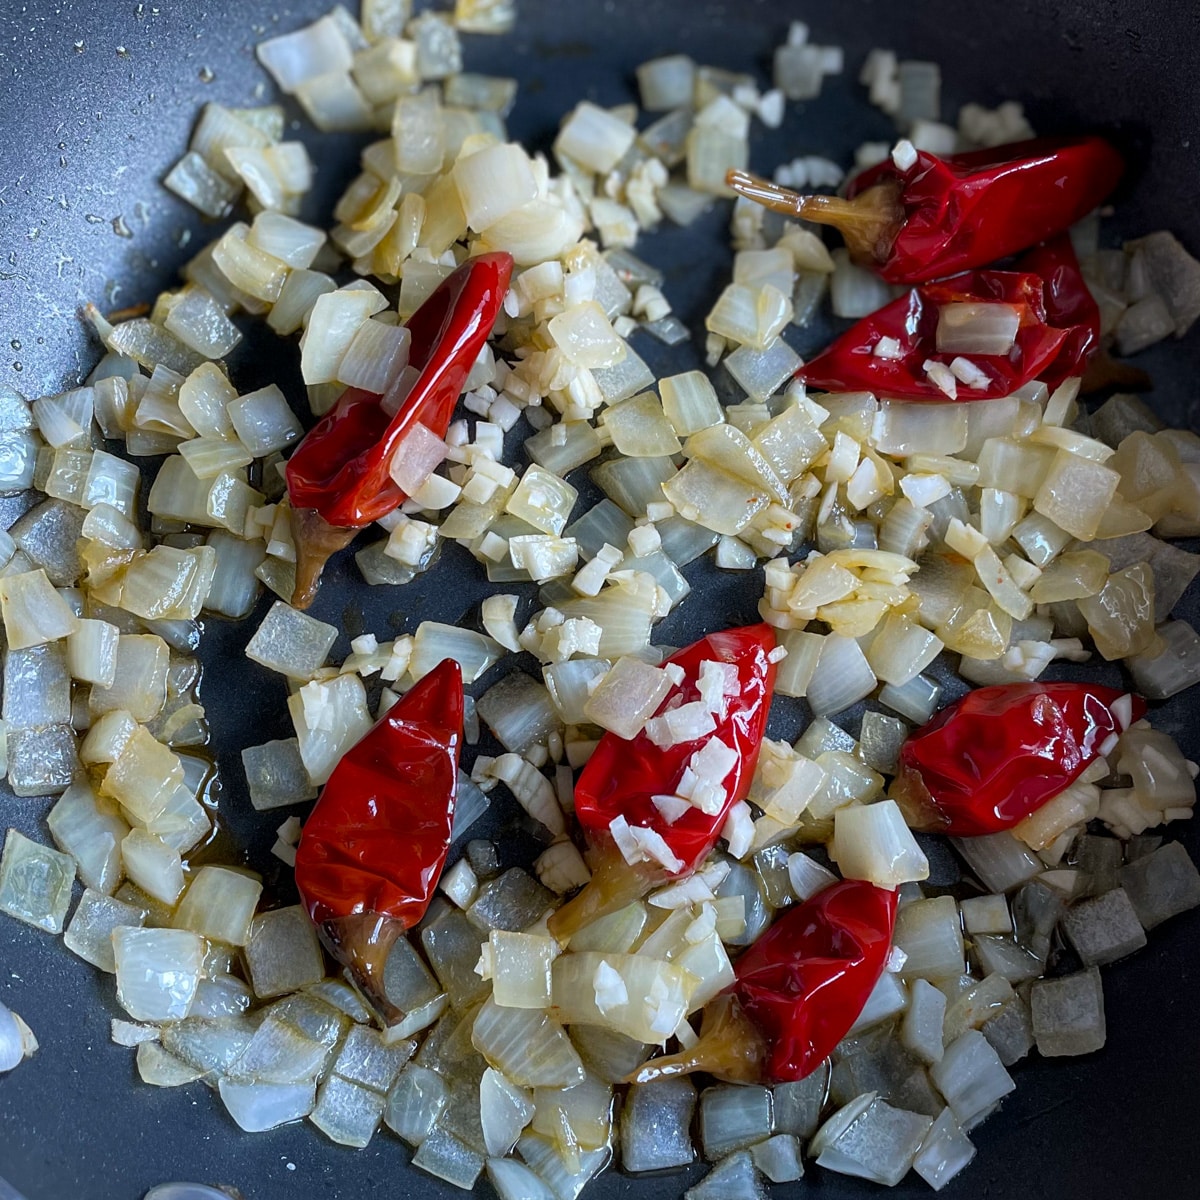 Sweating diced onion, whole Calabrian chilis, and minced garlic are pictured in a black pan.